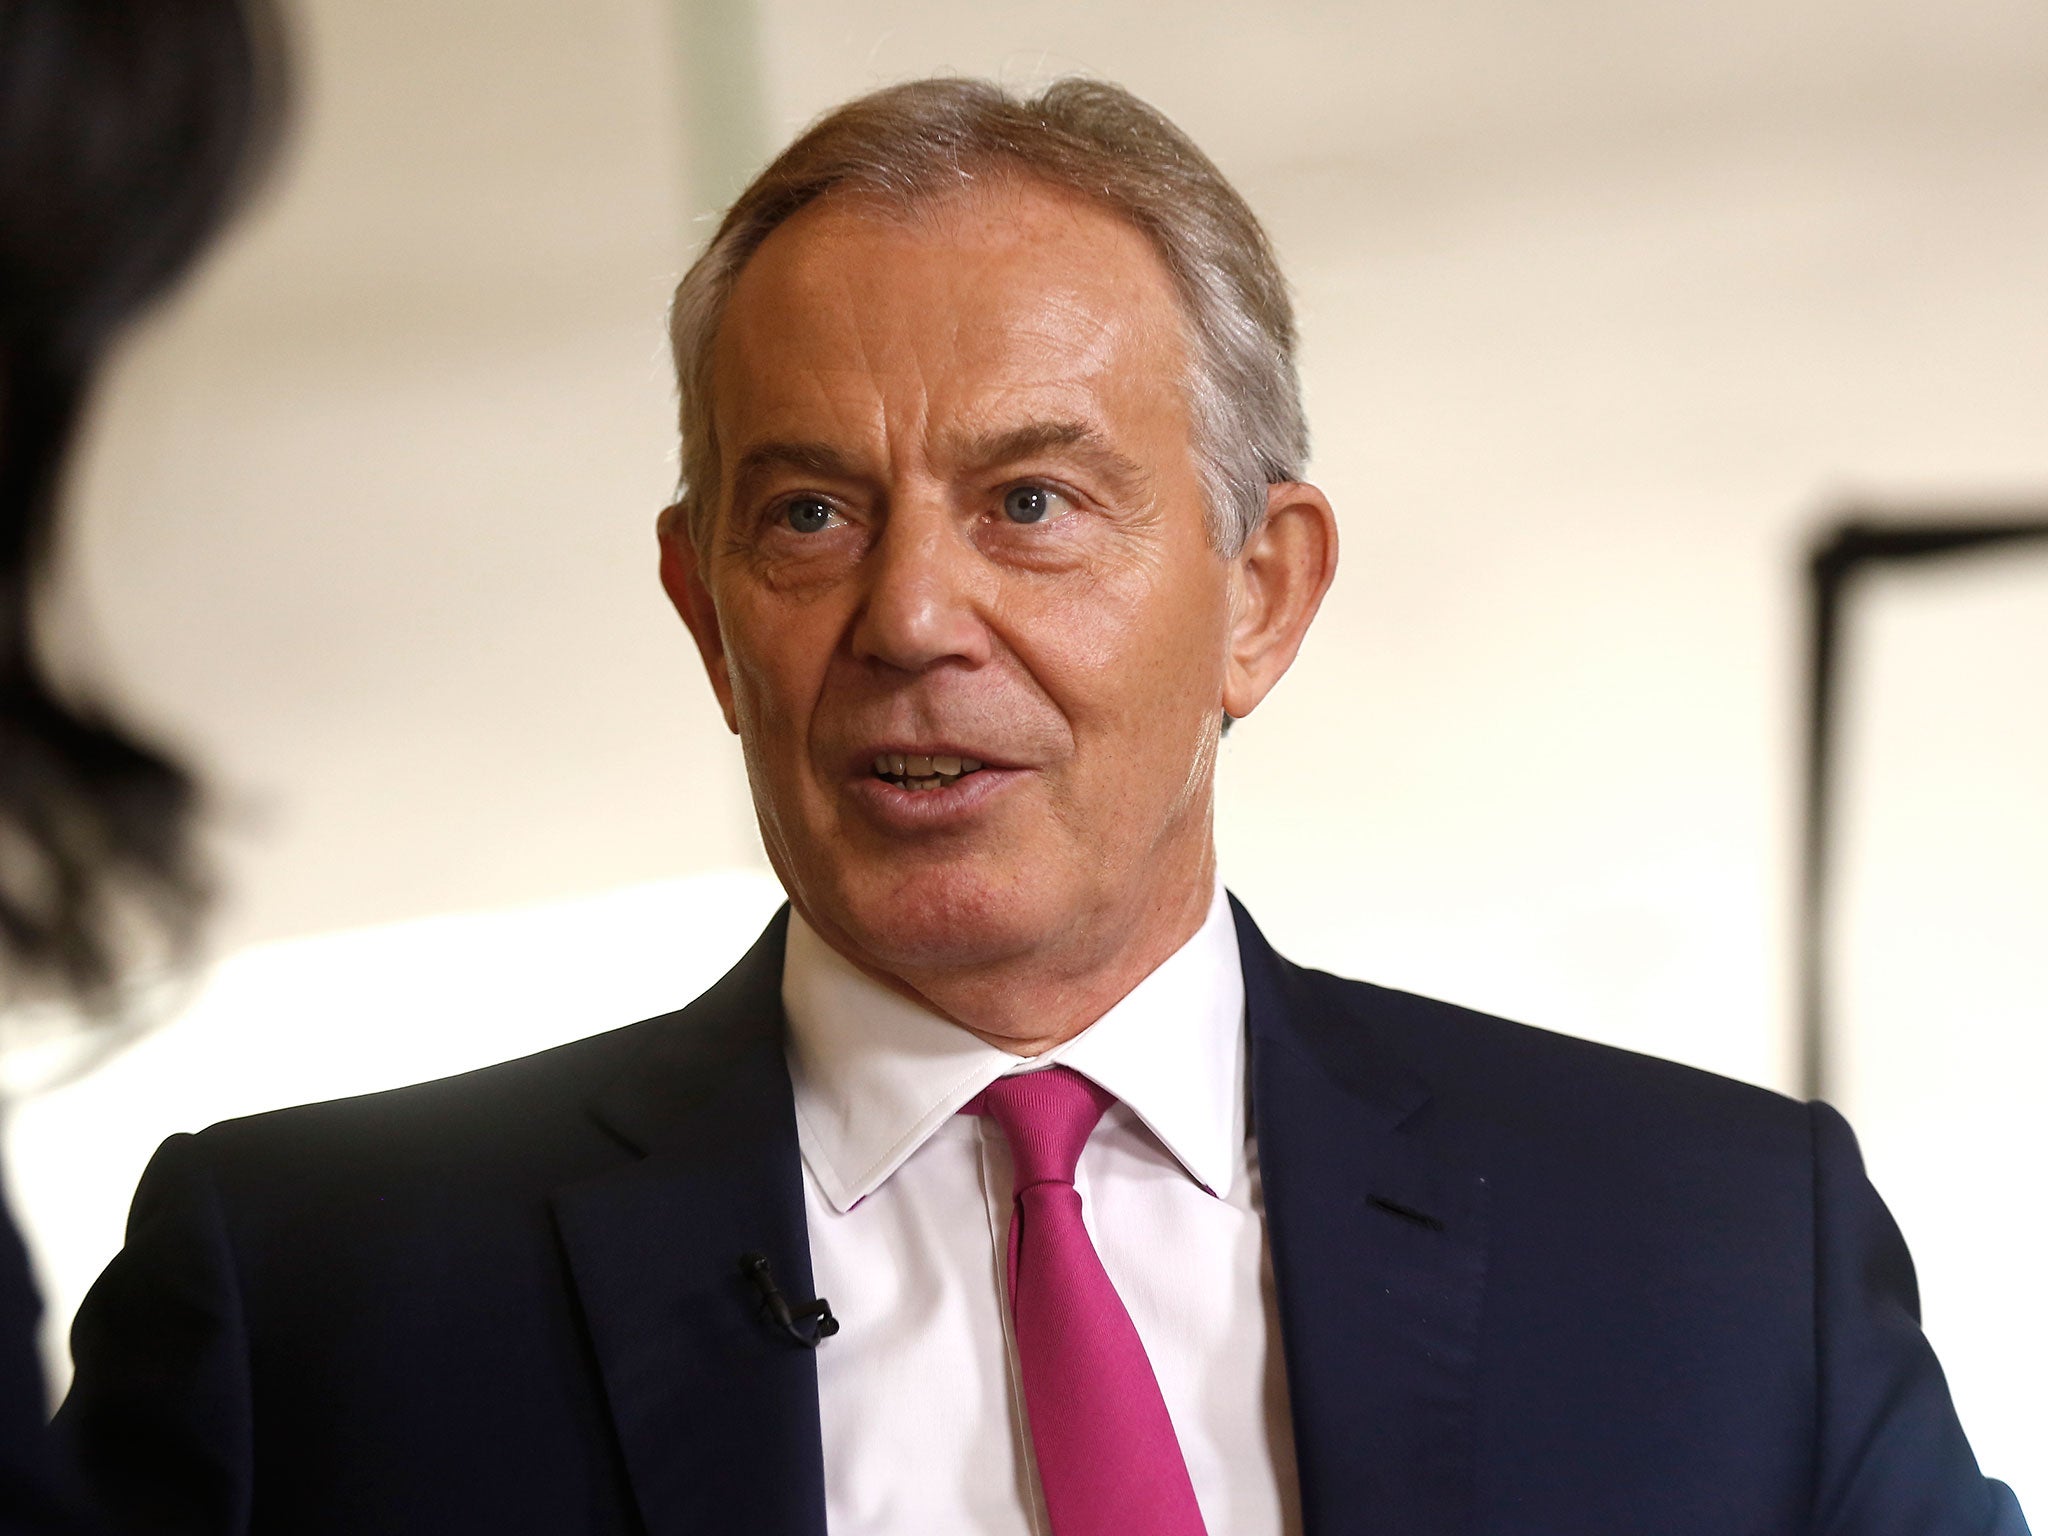 Tony Blair, who masterminded Britain's involvement in the 2003 invasion of Iraq, fears Isis may get a stranglehold on Libya